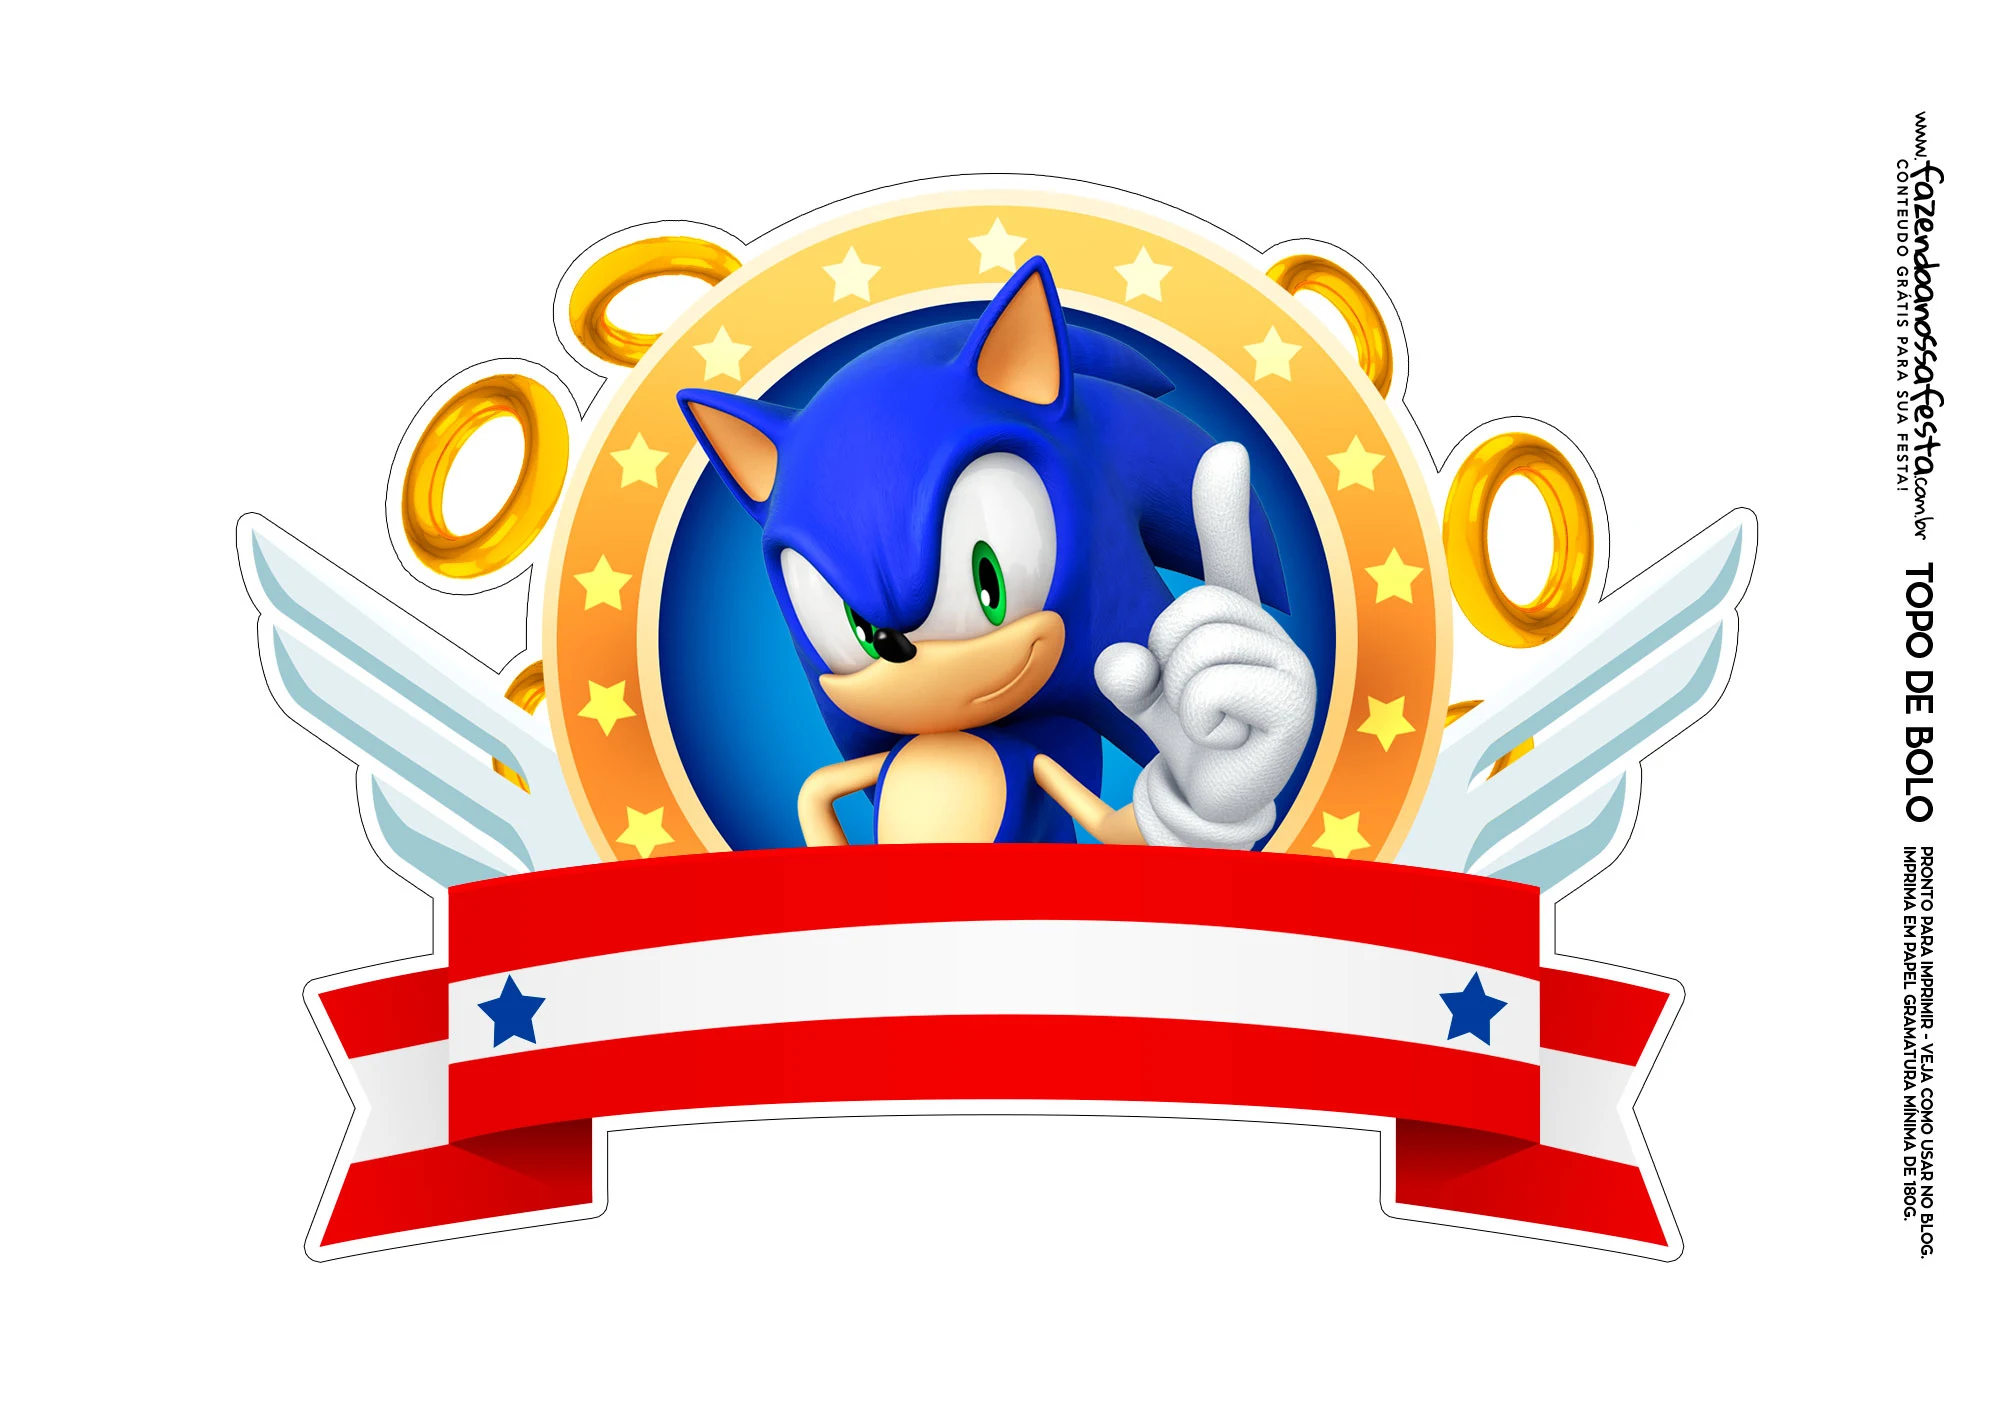 Sonic Party Free Printable Cake Toppers and Decoration. Oh My Fiesta